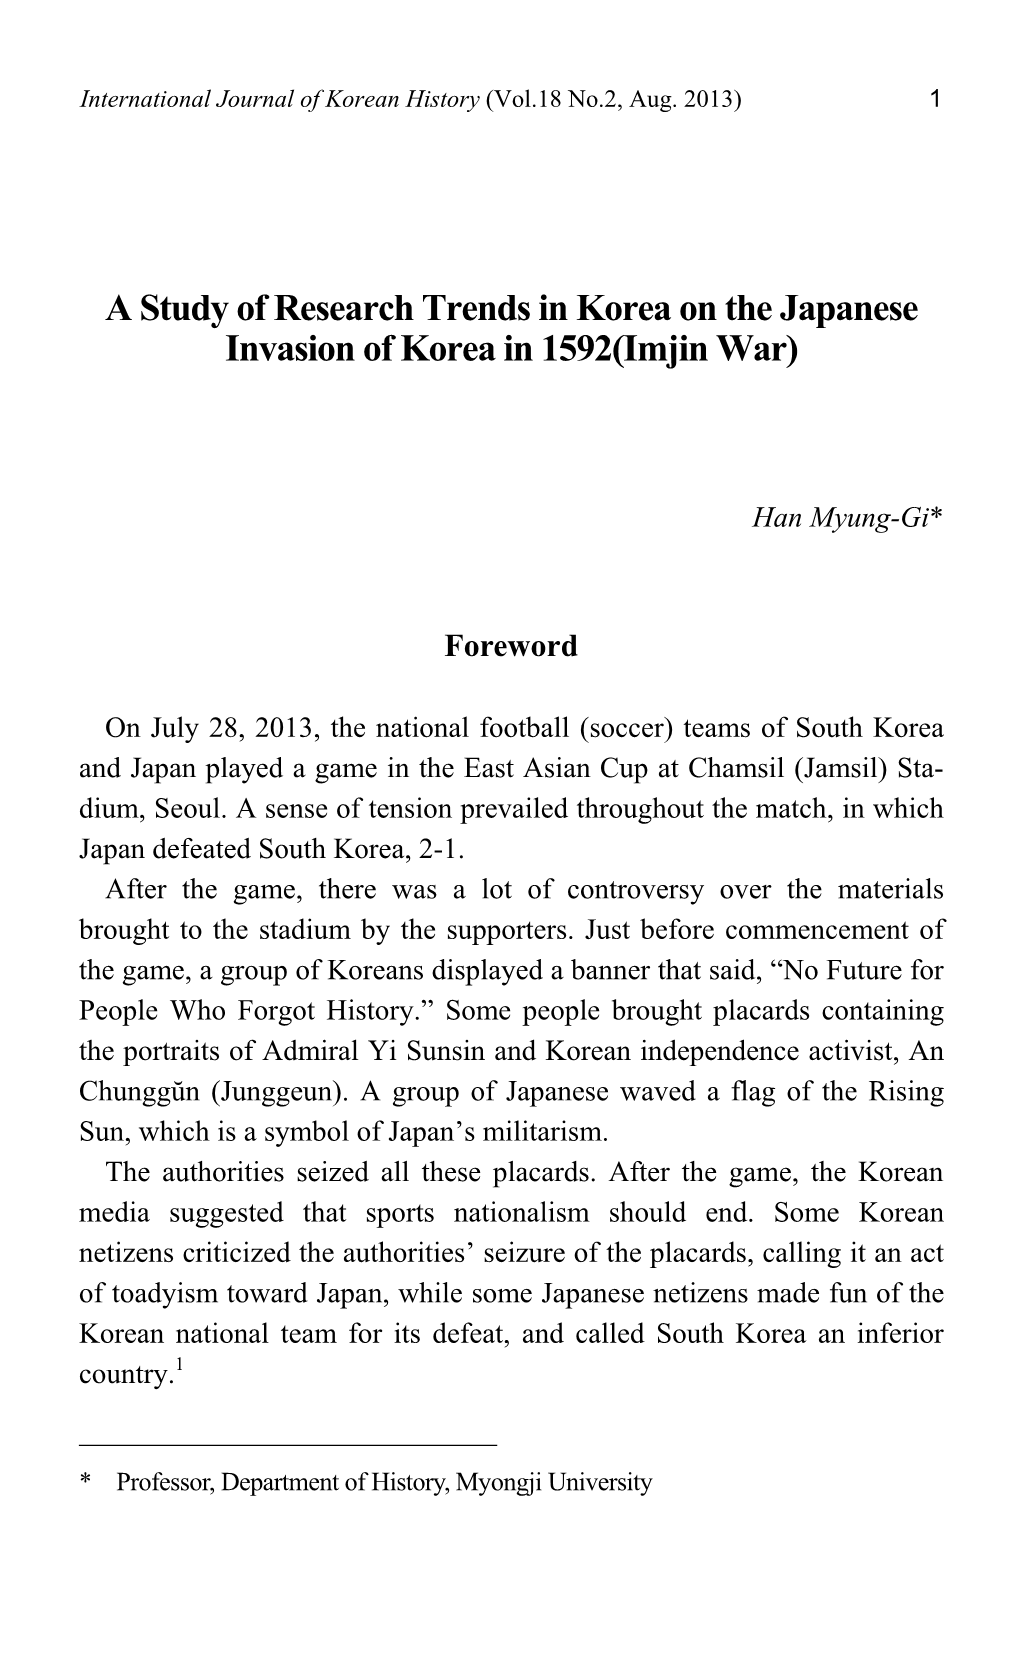 A Study of Research Trends in Korea on the Japanese Invasion of Korea in 1592(Imjin War)